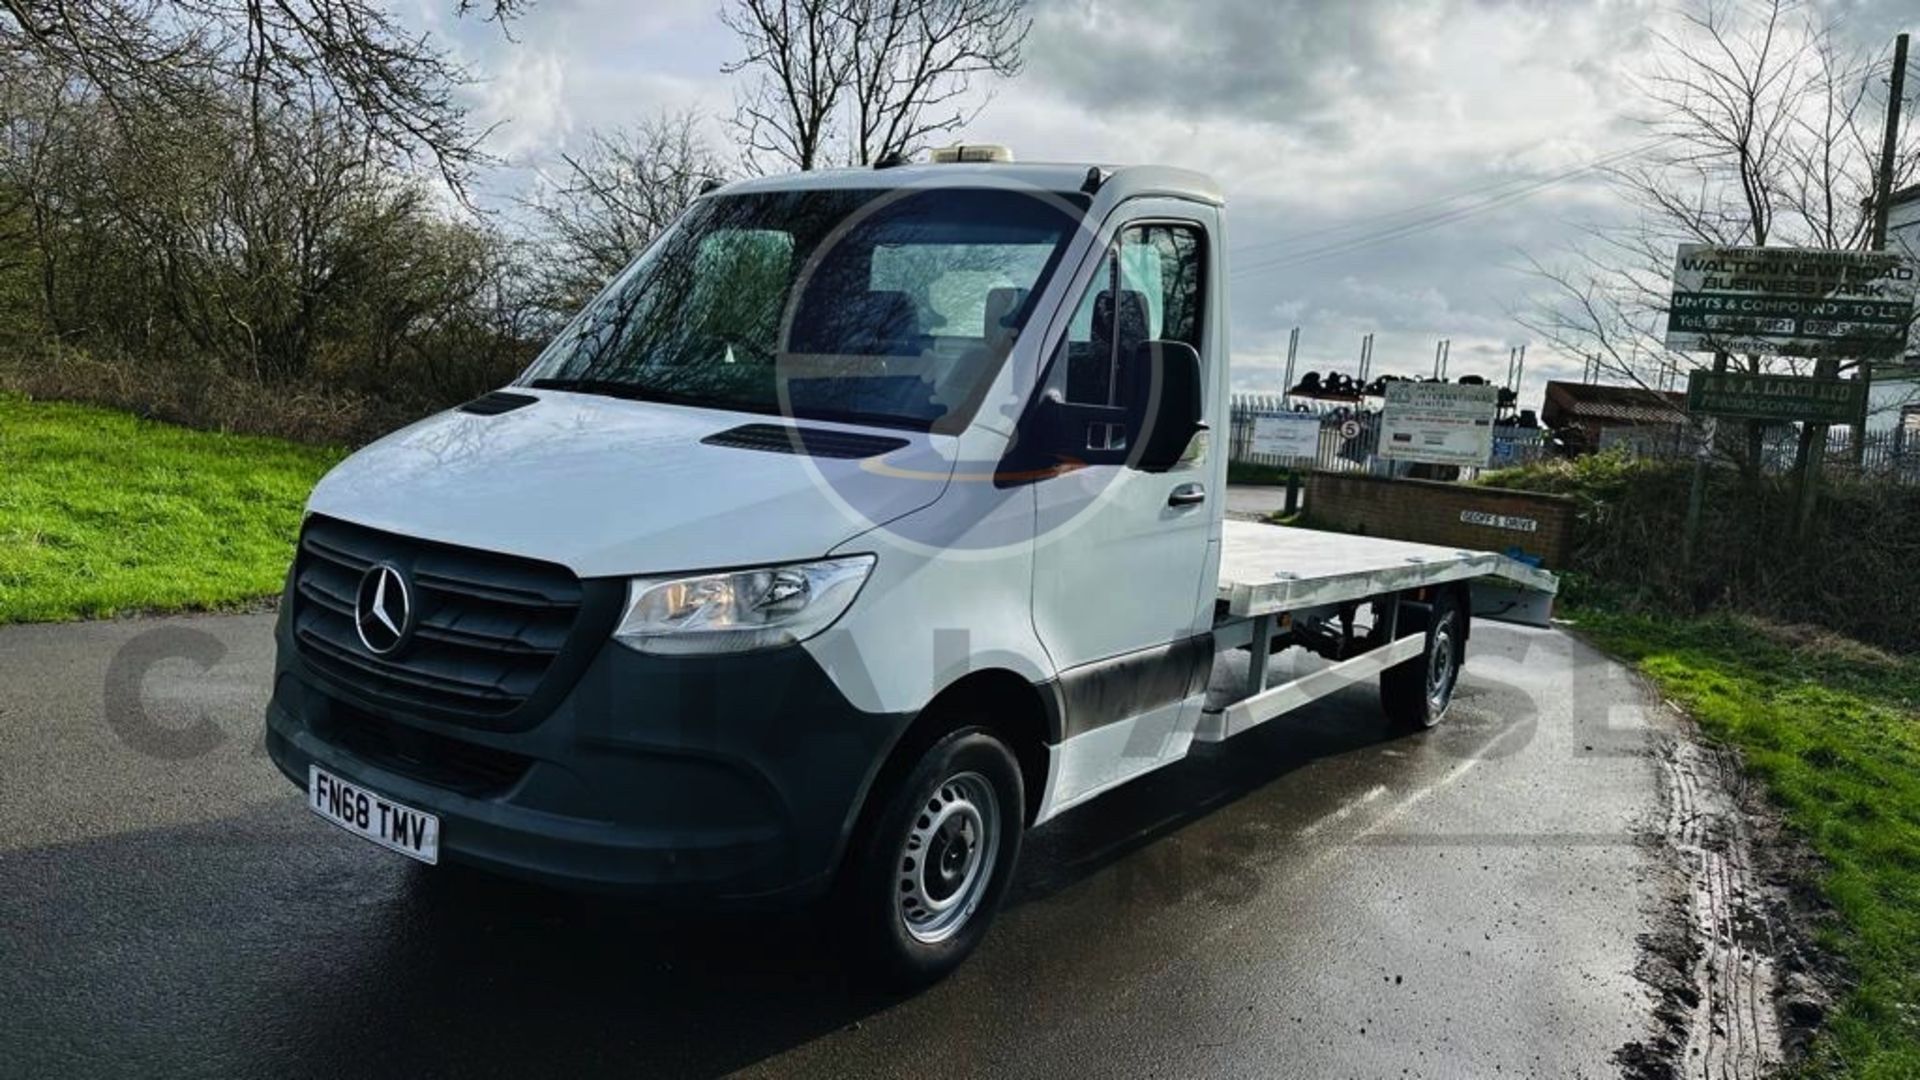 MERCEDES SPRINTER 314CDI "LWB RECOVERY TRUCK" 2019 MODEL - 1 OWNER - NEW BODY FITTED WITH ELEC WINCH - Image 8 of 37